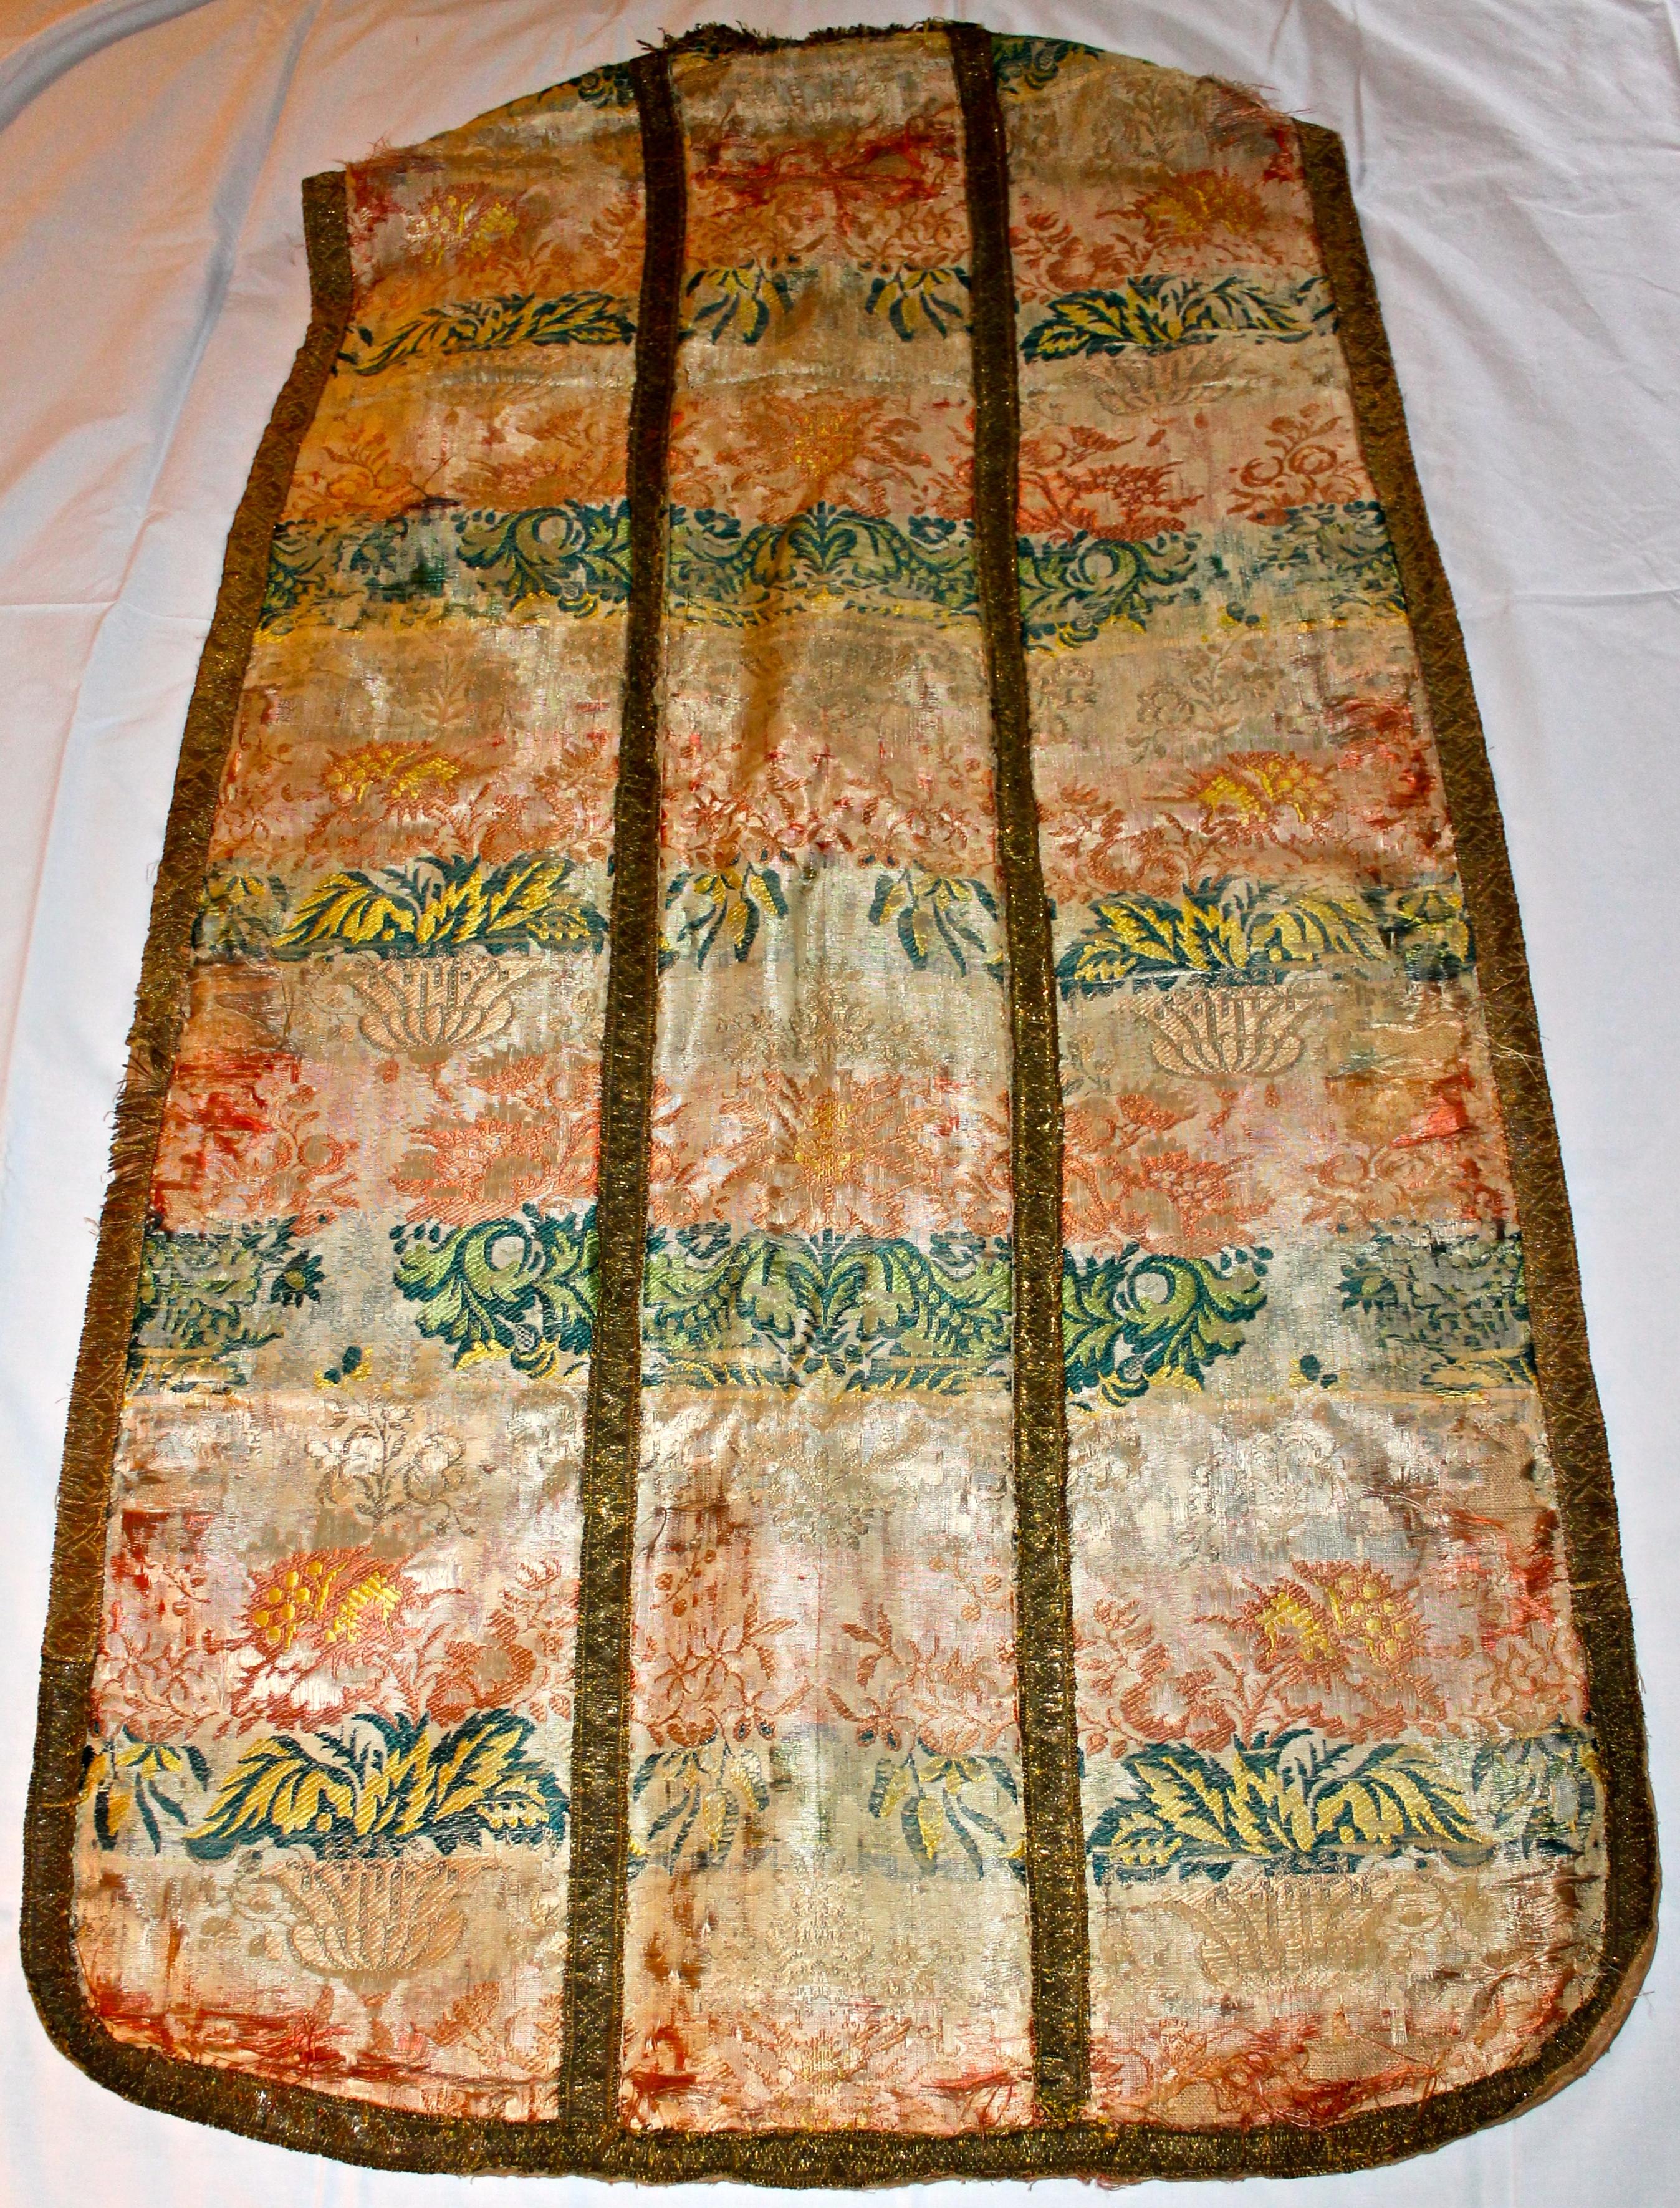 Silk embroidered antique vestment. Lined in linen. Old repairs- basically a covering of some of the more thinned areas on the front.